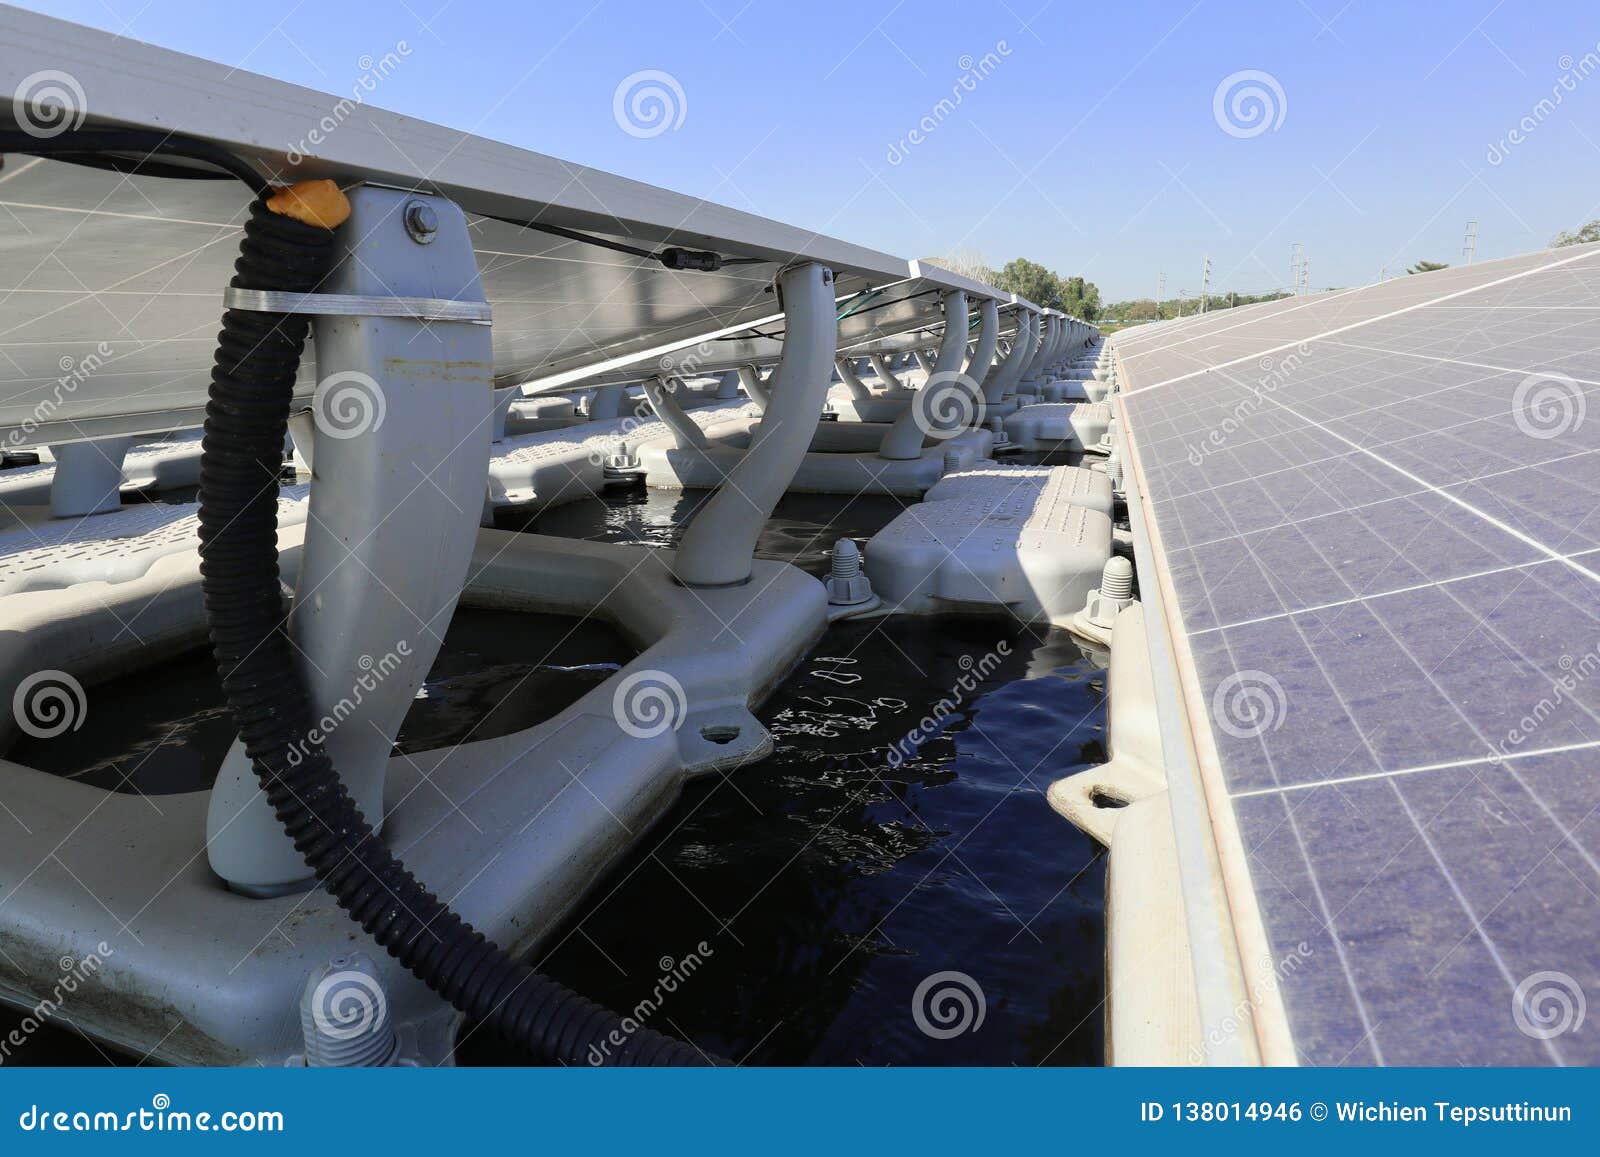 floating solar pv system close up view